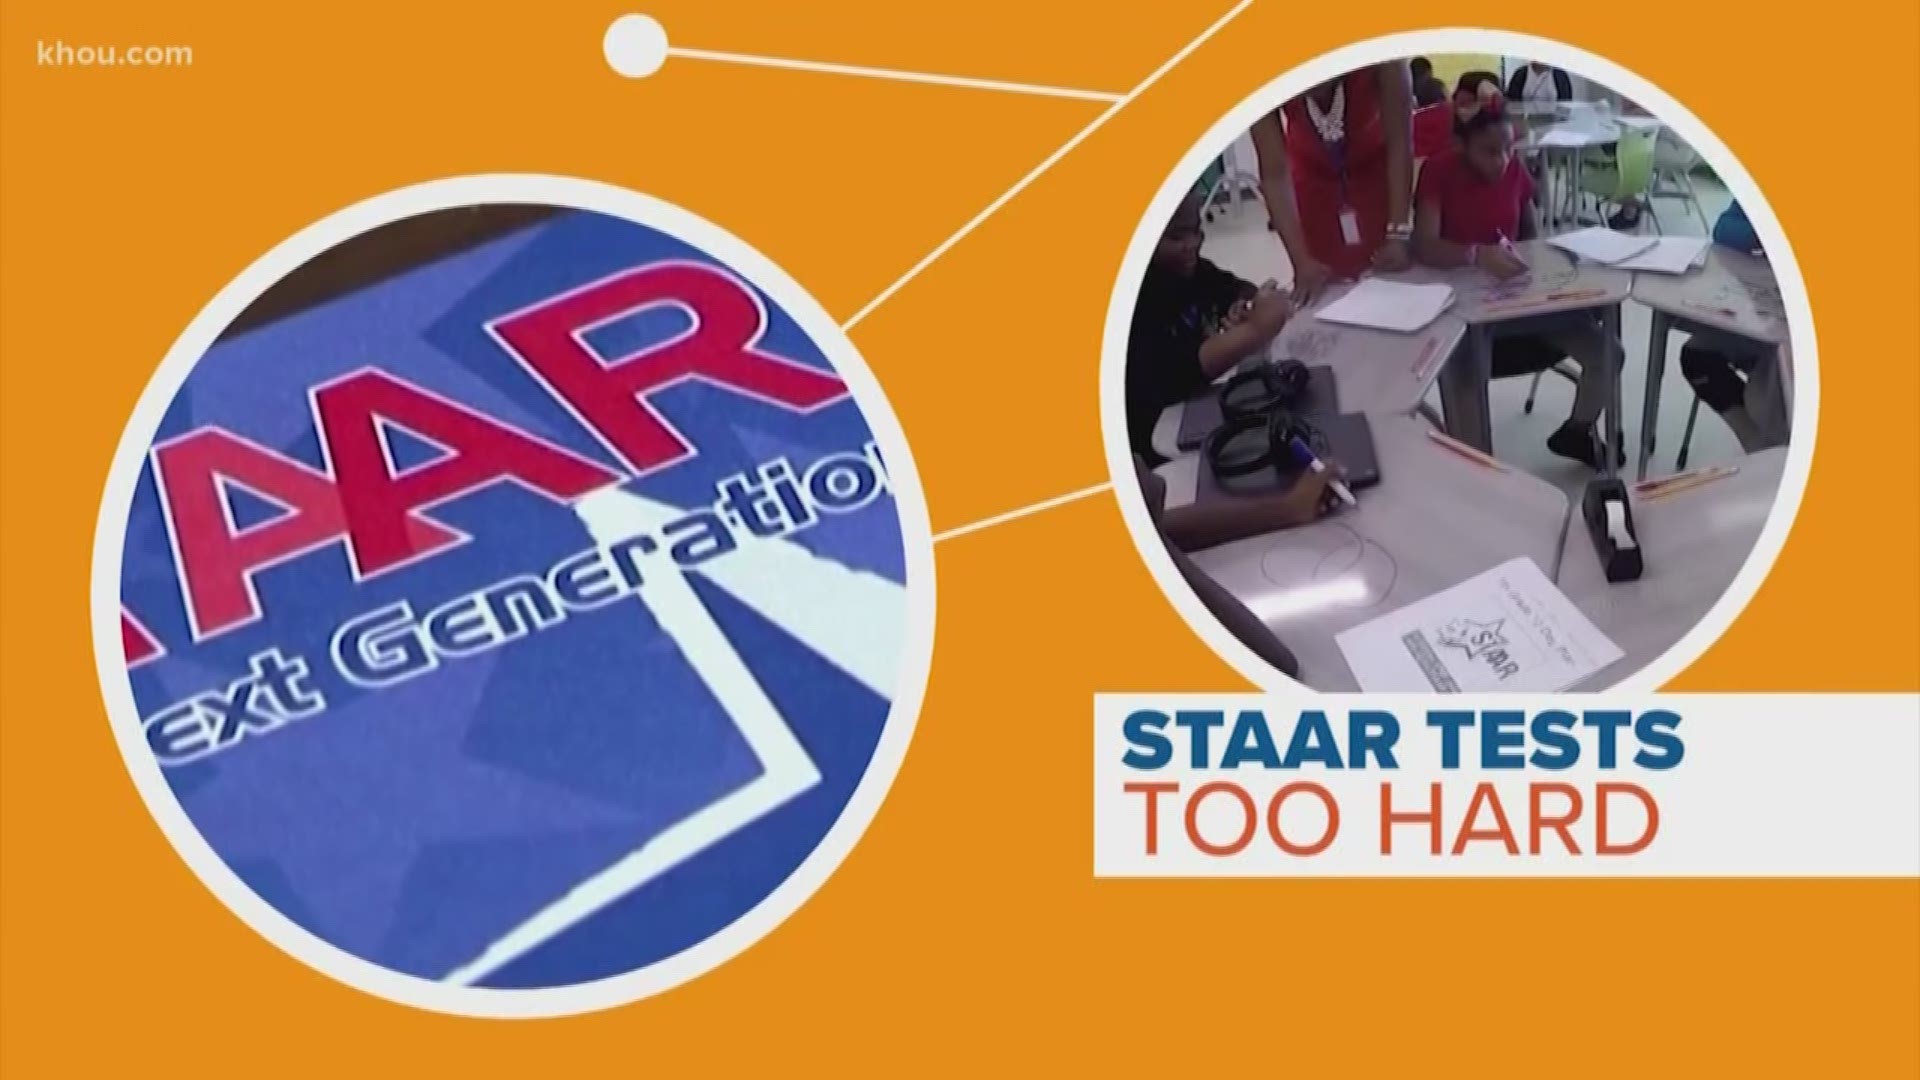 A state senator wants to put STAAR testing on hold, for at least the next two years. It's not the first time a lawmaker has suggested getting rid of the test in public schools. So why is STAAR so controversial? Rekha Muddaraj connects the dots.